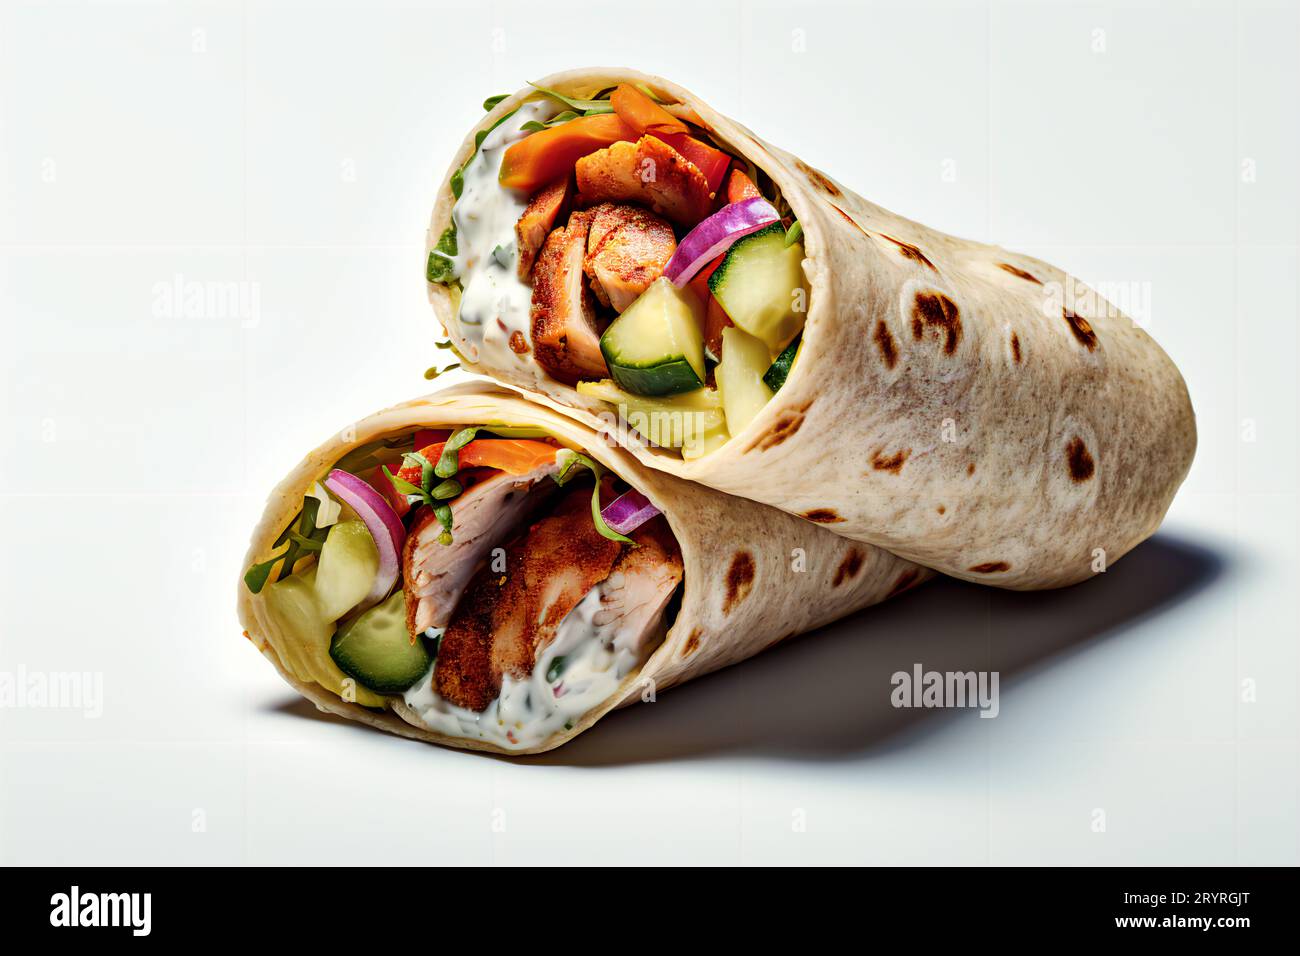 A burrito wrap filled with assorted vegetables and meats on a white plate, served with a side of sour cream and guacamole Stock Photo